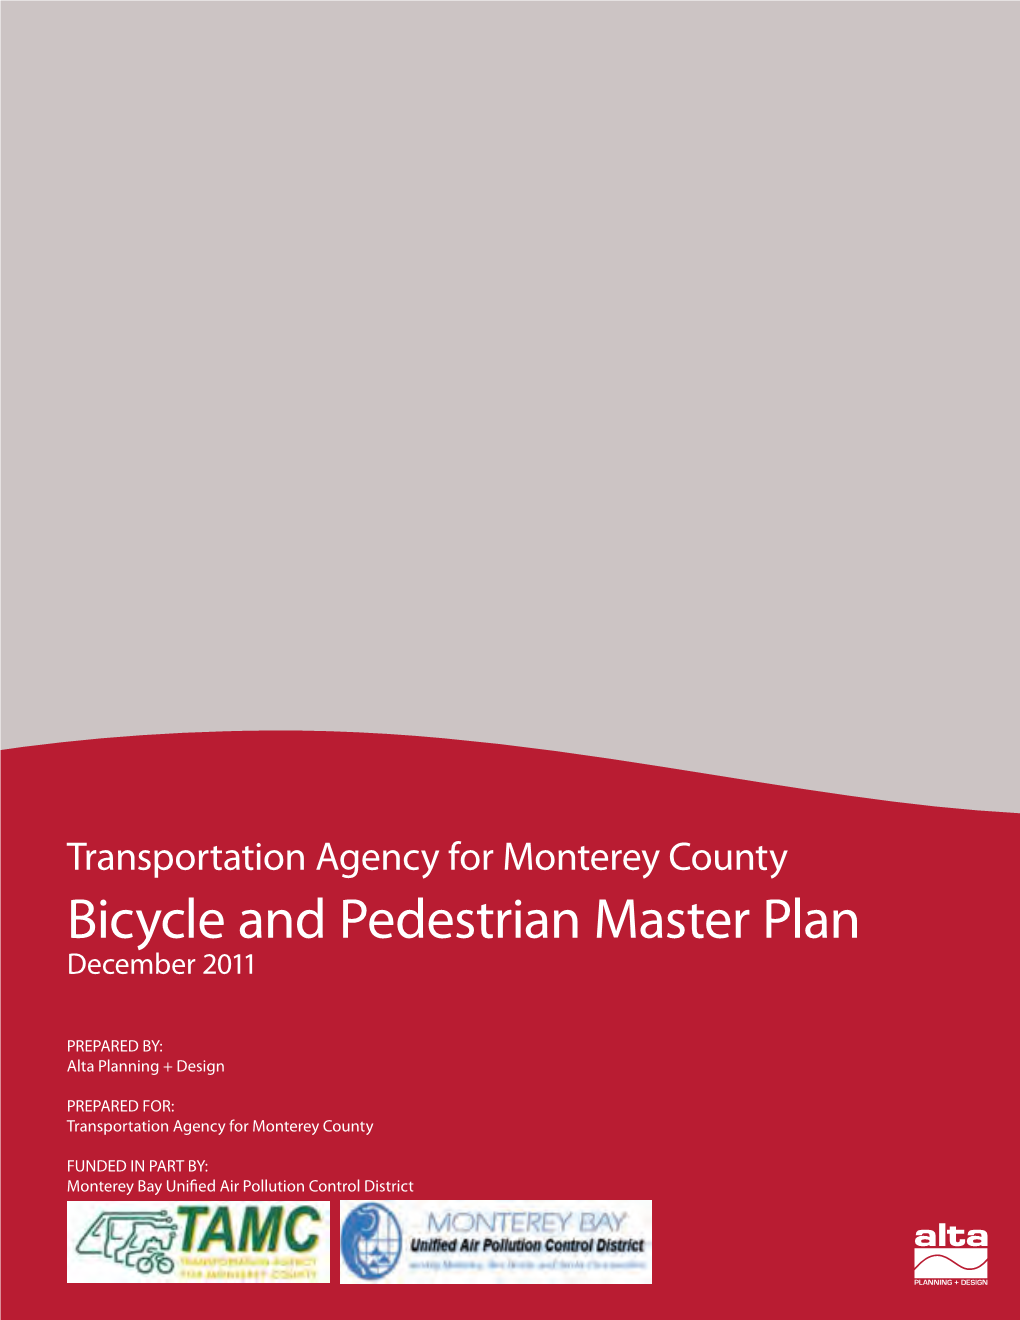 Transportation Agency for Monterey County Bicycle and Pedestrian Master Plan December 2011